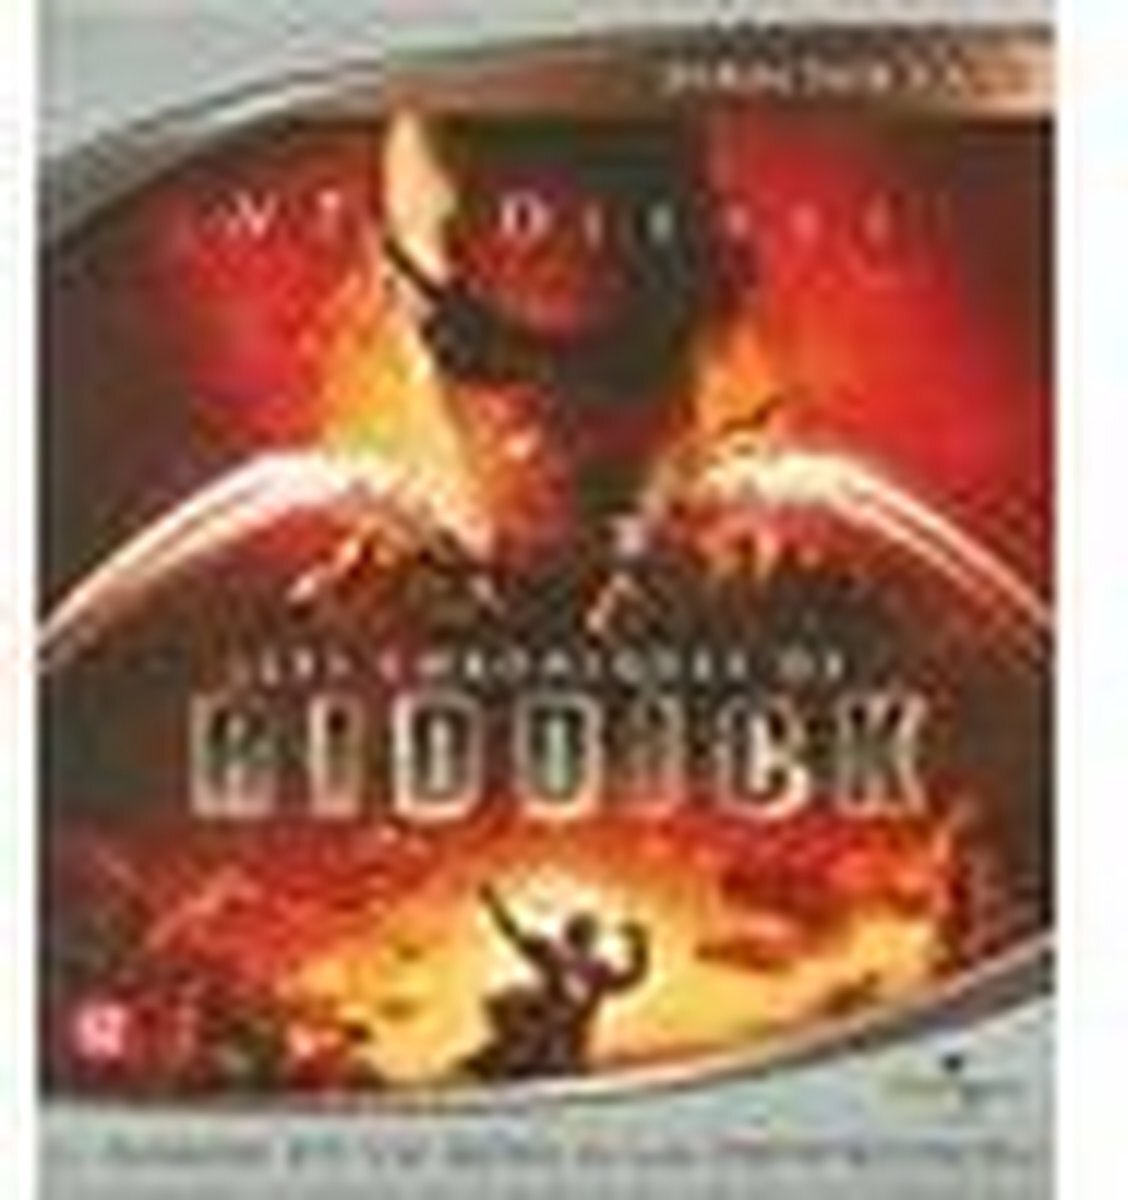 Unknown HD DVD - Riddick Chroniques